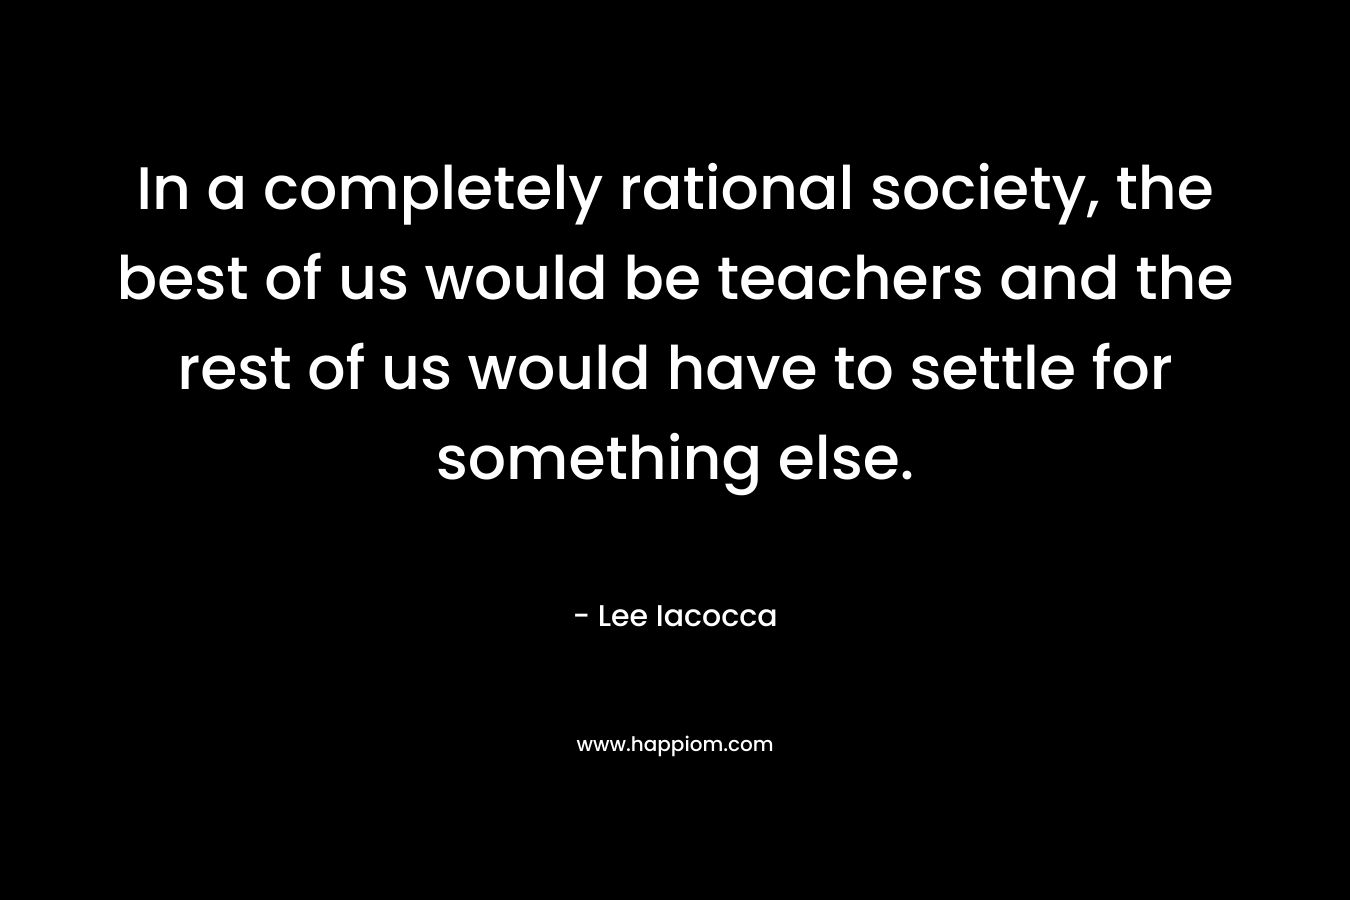 In a completely rational society, the best of us would be teachers and the rest of us would have to settle for something else. – Lee Iacocca